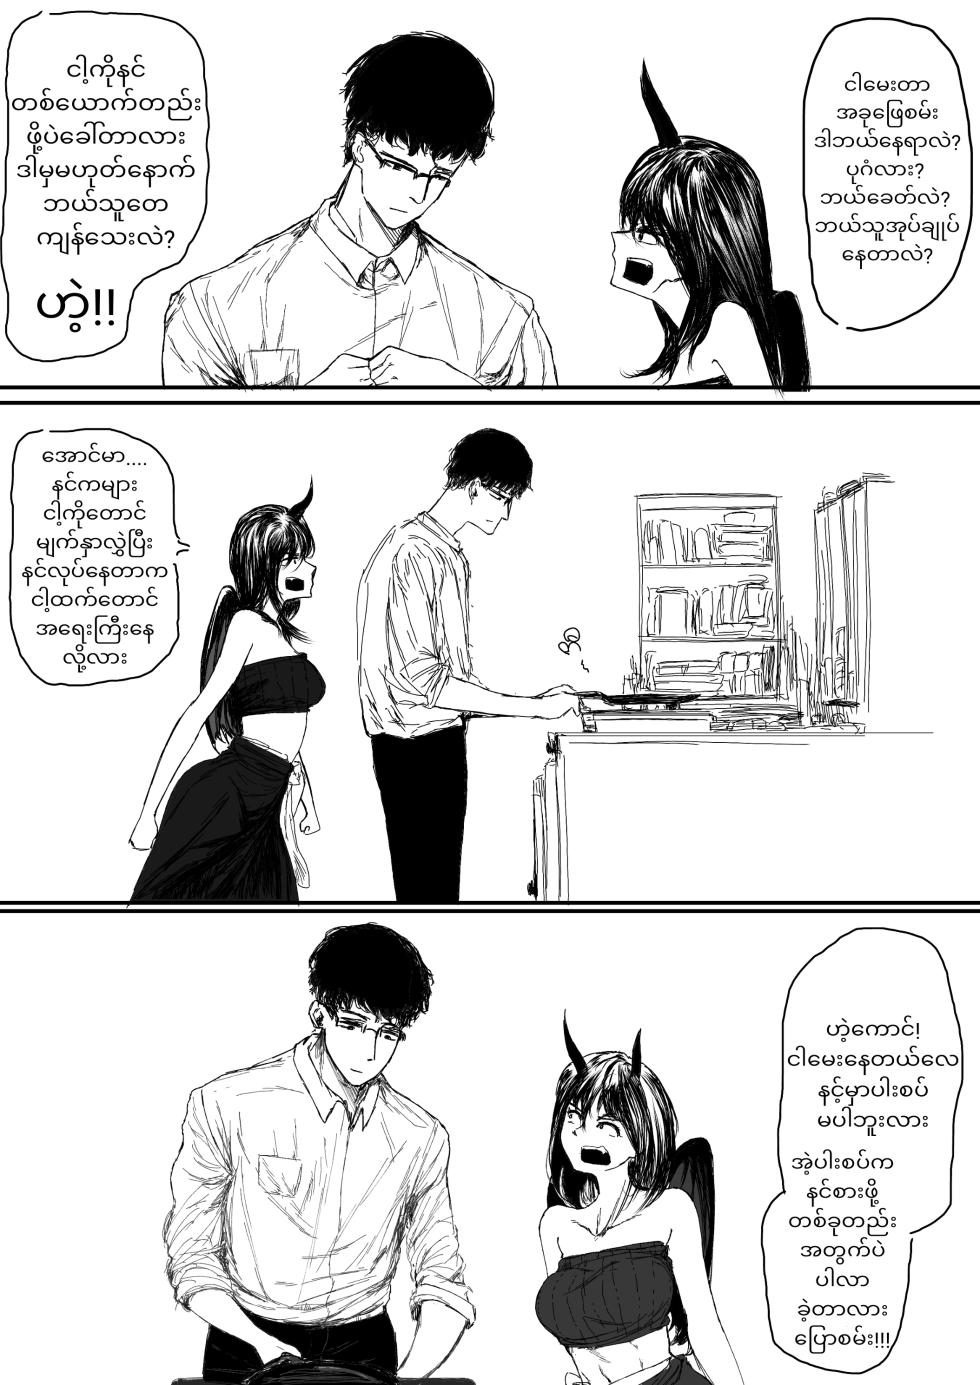 Home Succubus Wadi~ Chapter-2 Part-1 |BURMESE| - Page 5